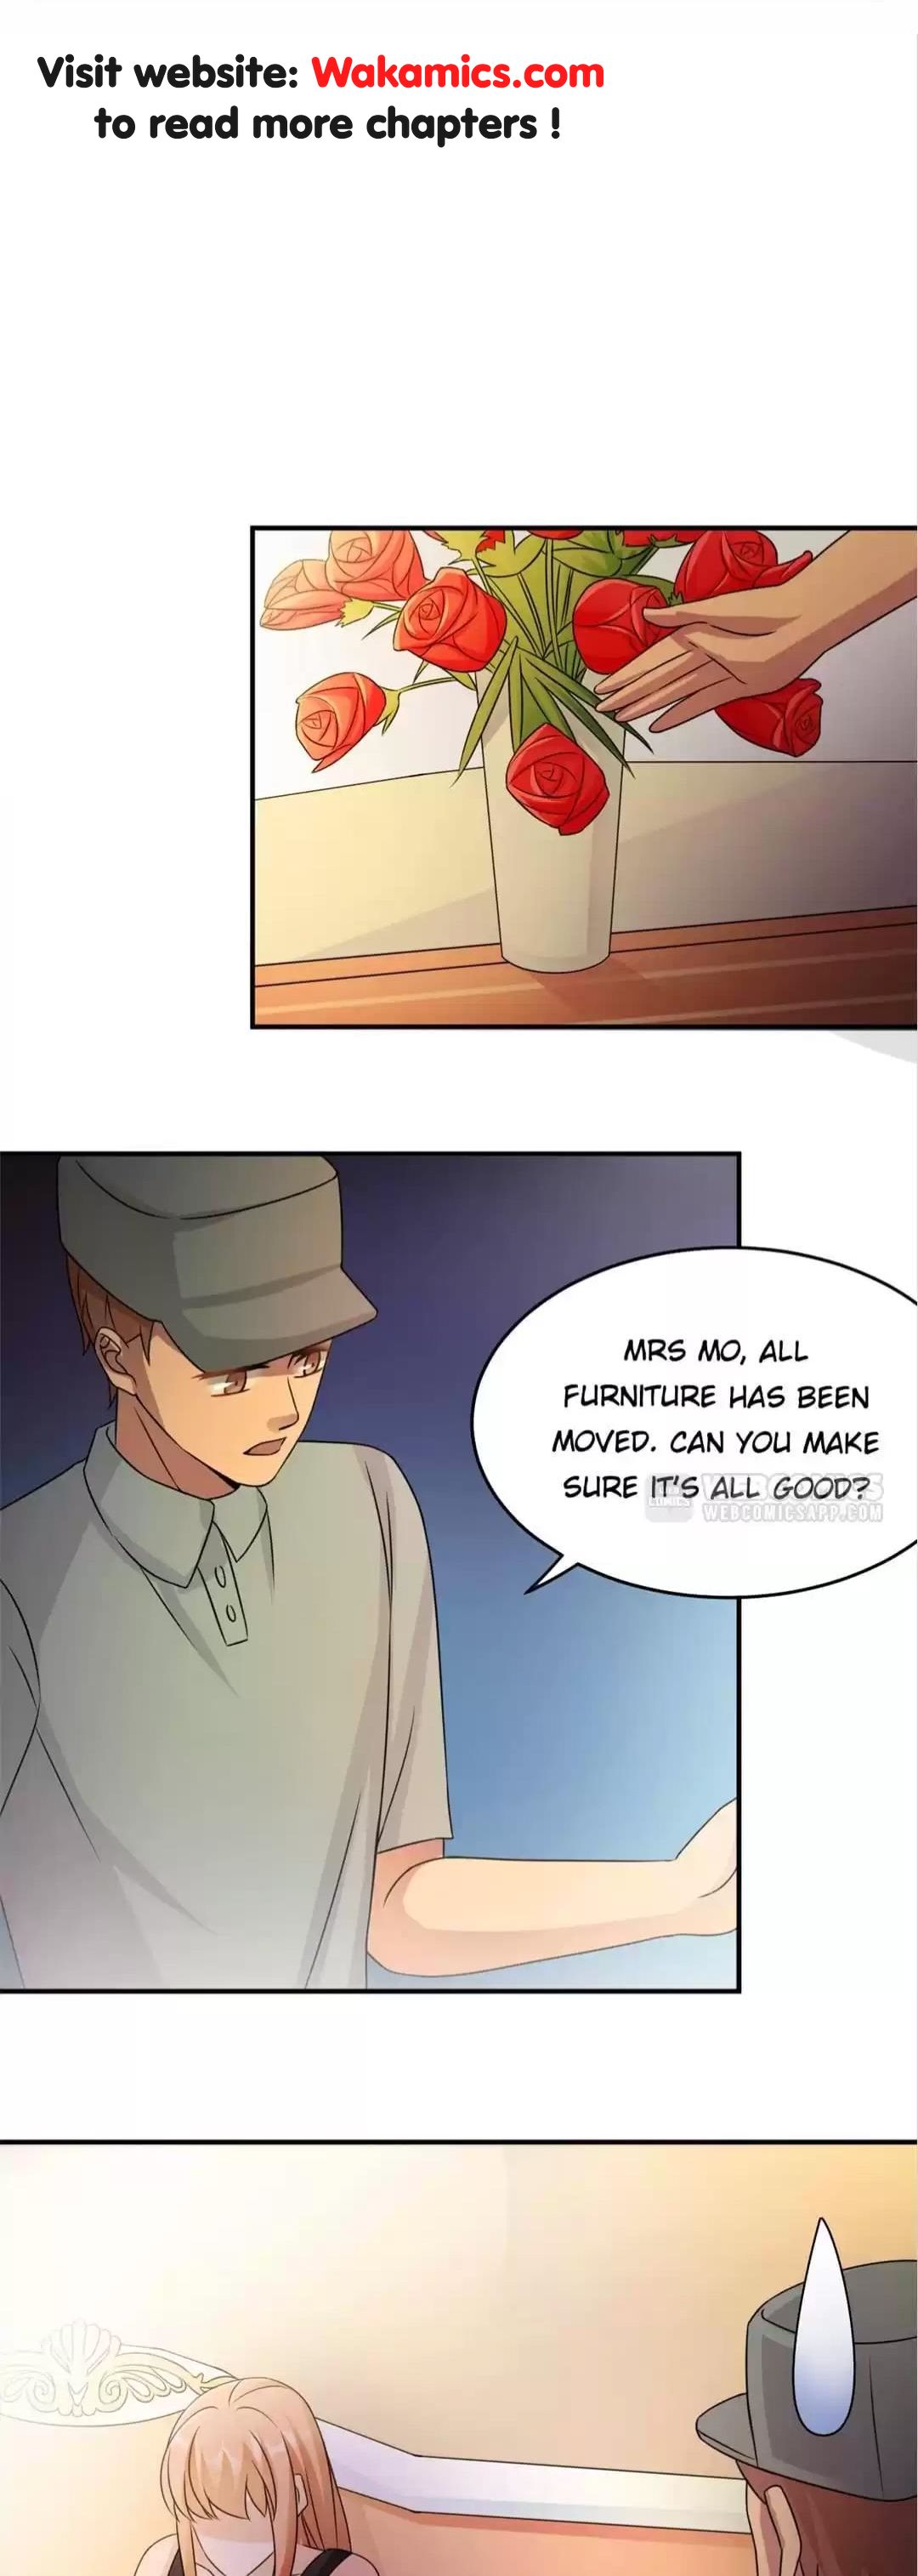 Forced Marriage, Stubborn Wife - Page 1